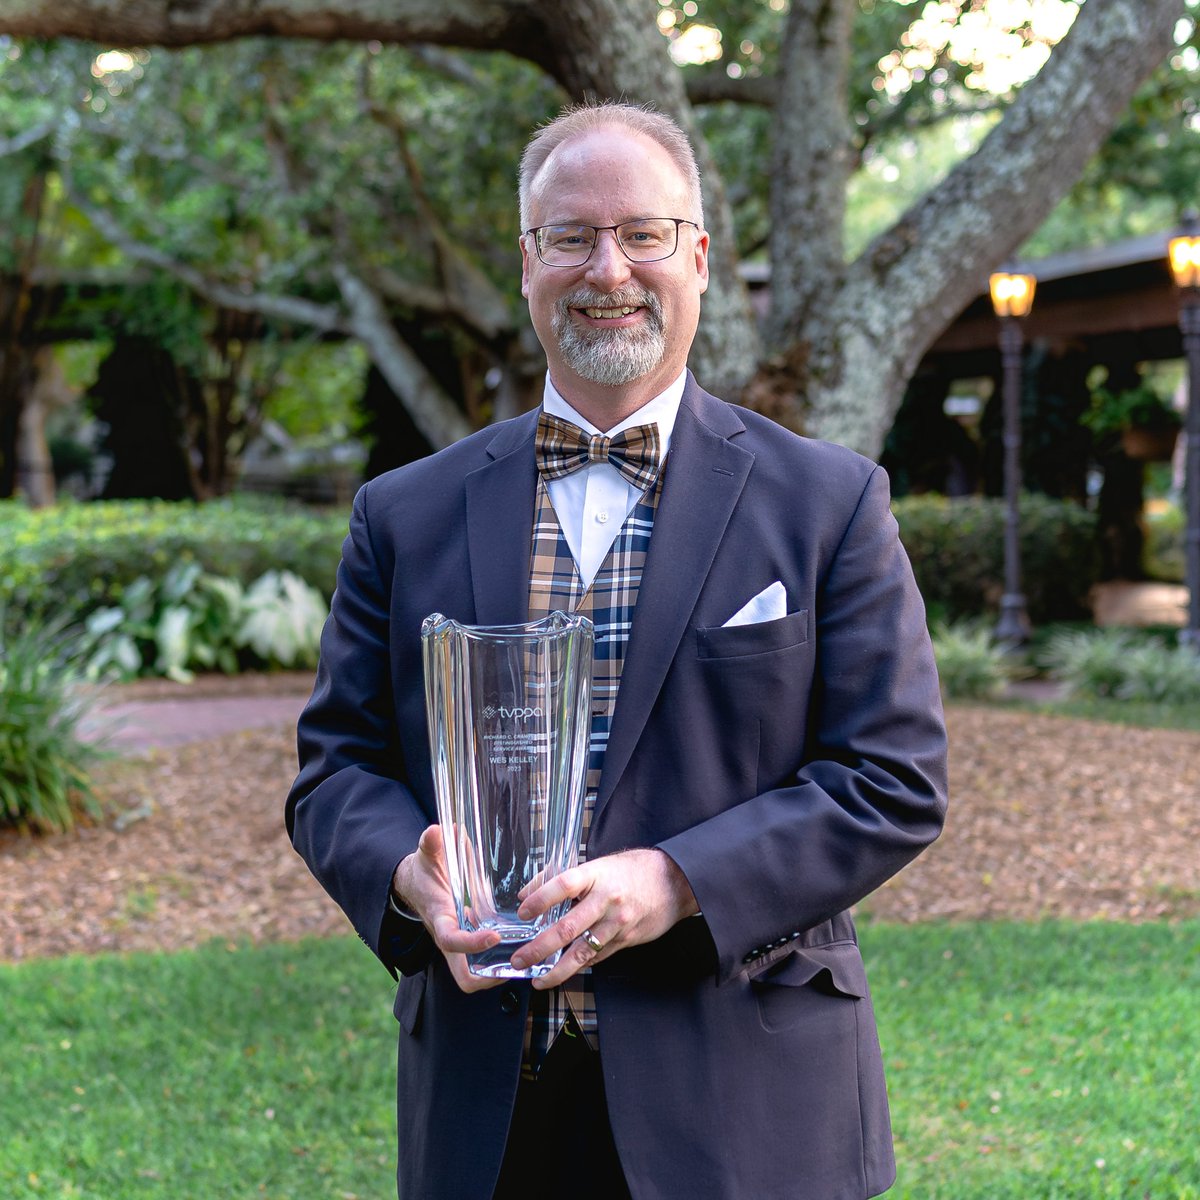 Congratulations to the 2023 recipient of the Richard C. Crawford Distinguished Service Award, Wes Kelley of @HSVUtilities! Thank you, Wes, for your many years of dedication and leadership to TVPPA and to your community. #TVPPA77th #TVPPA